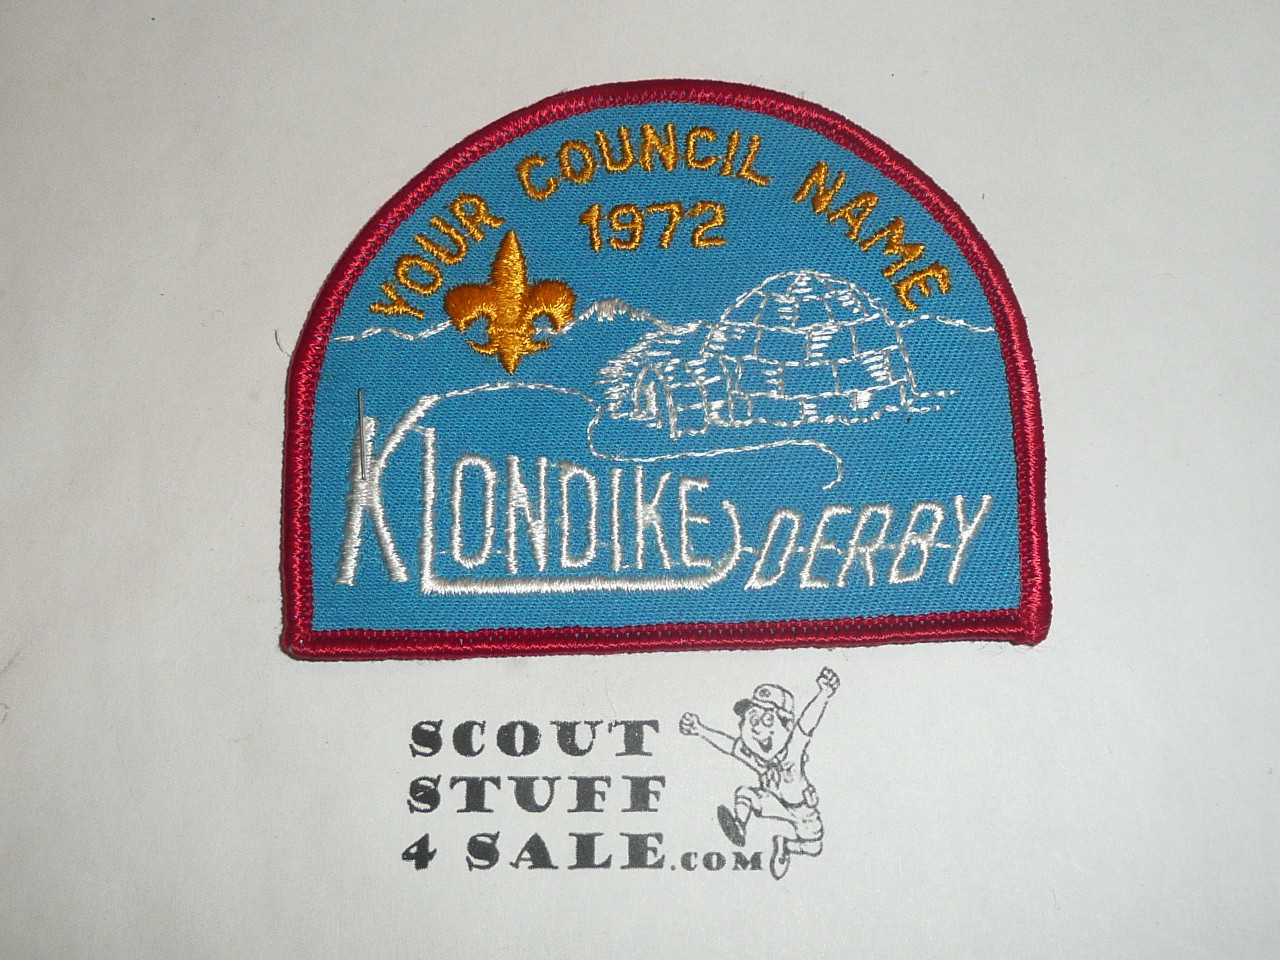 Your Council Name Sample Patch, 1972 Klondike Derby